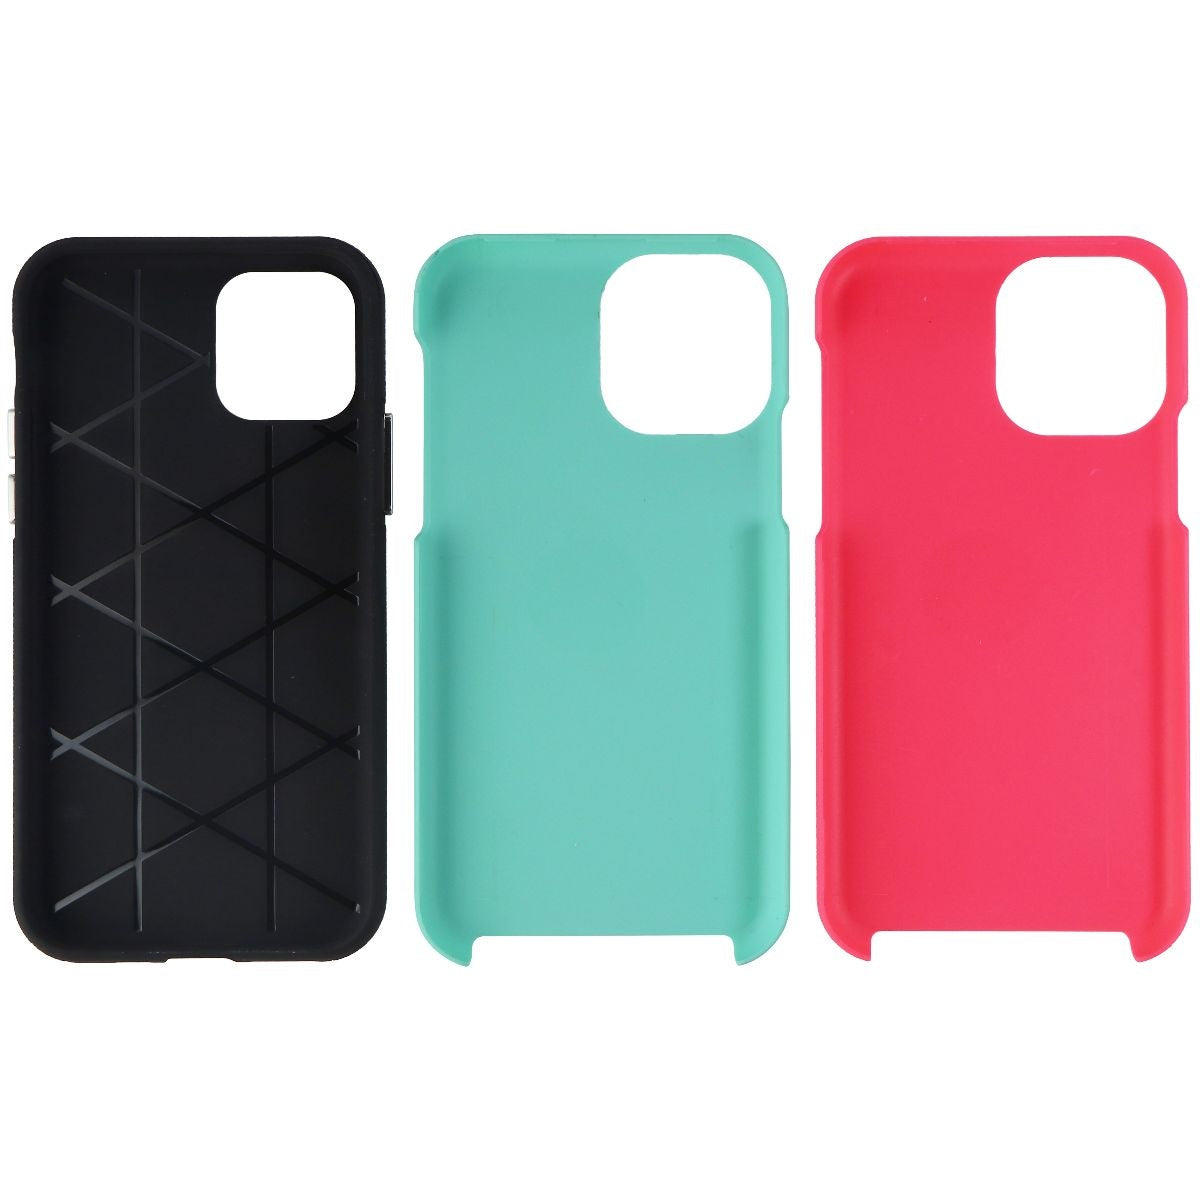 Blu Element Armour 2x Case & Colour Kit for iPhone 11 Pro - Black/Green/Pink Cell Phone - Cases, Covers & Skins Blu Element    - Simple Cell Bulk Wholesale Pricing - USA Seller